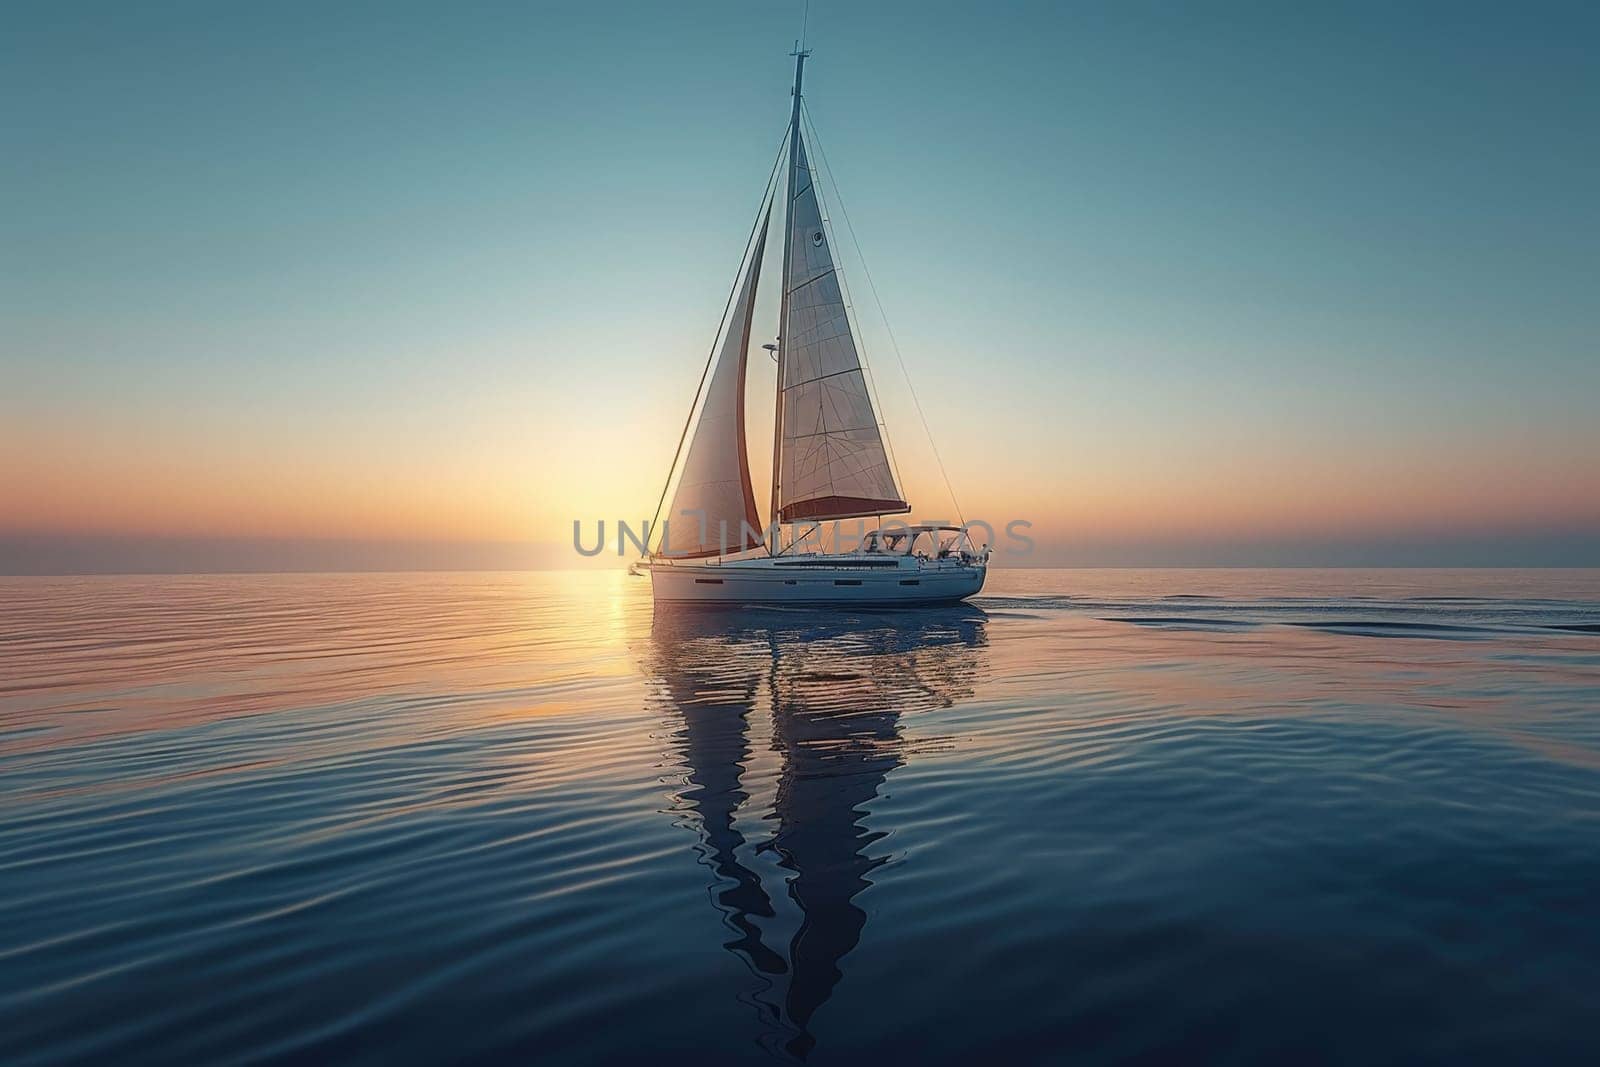 A sailboat is sailing in the ocean, Minimalist photography of a sailboat.